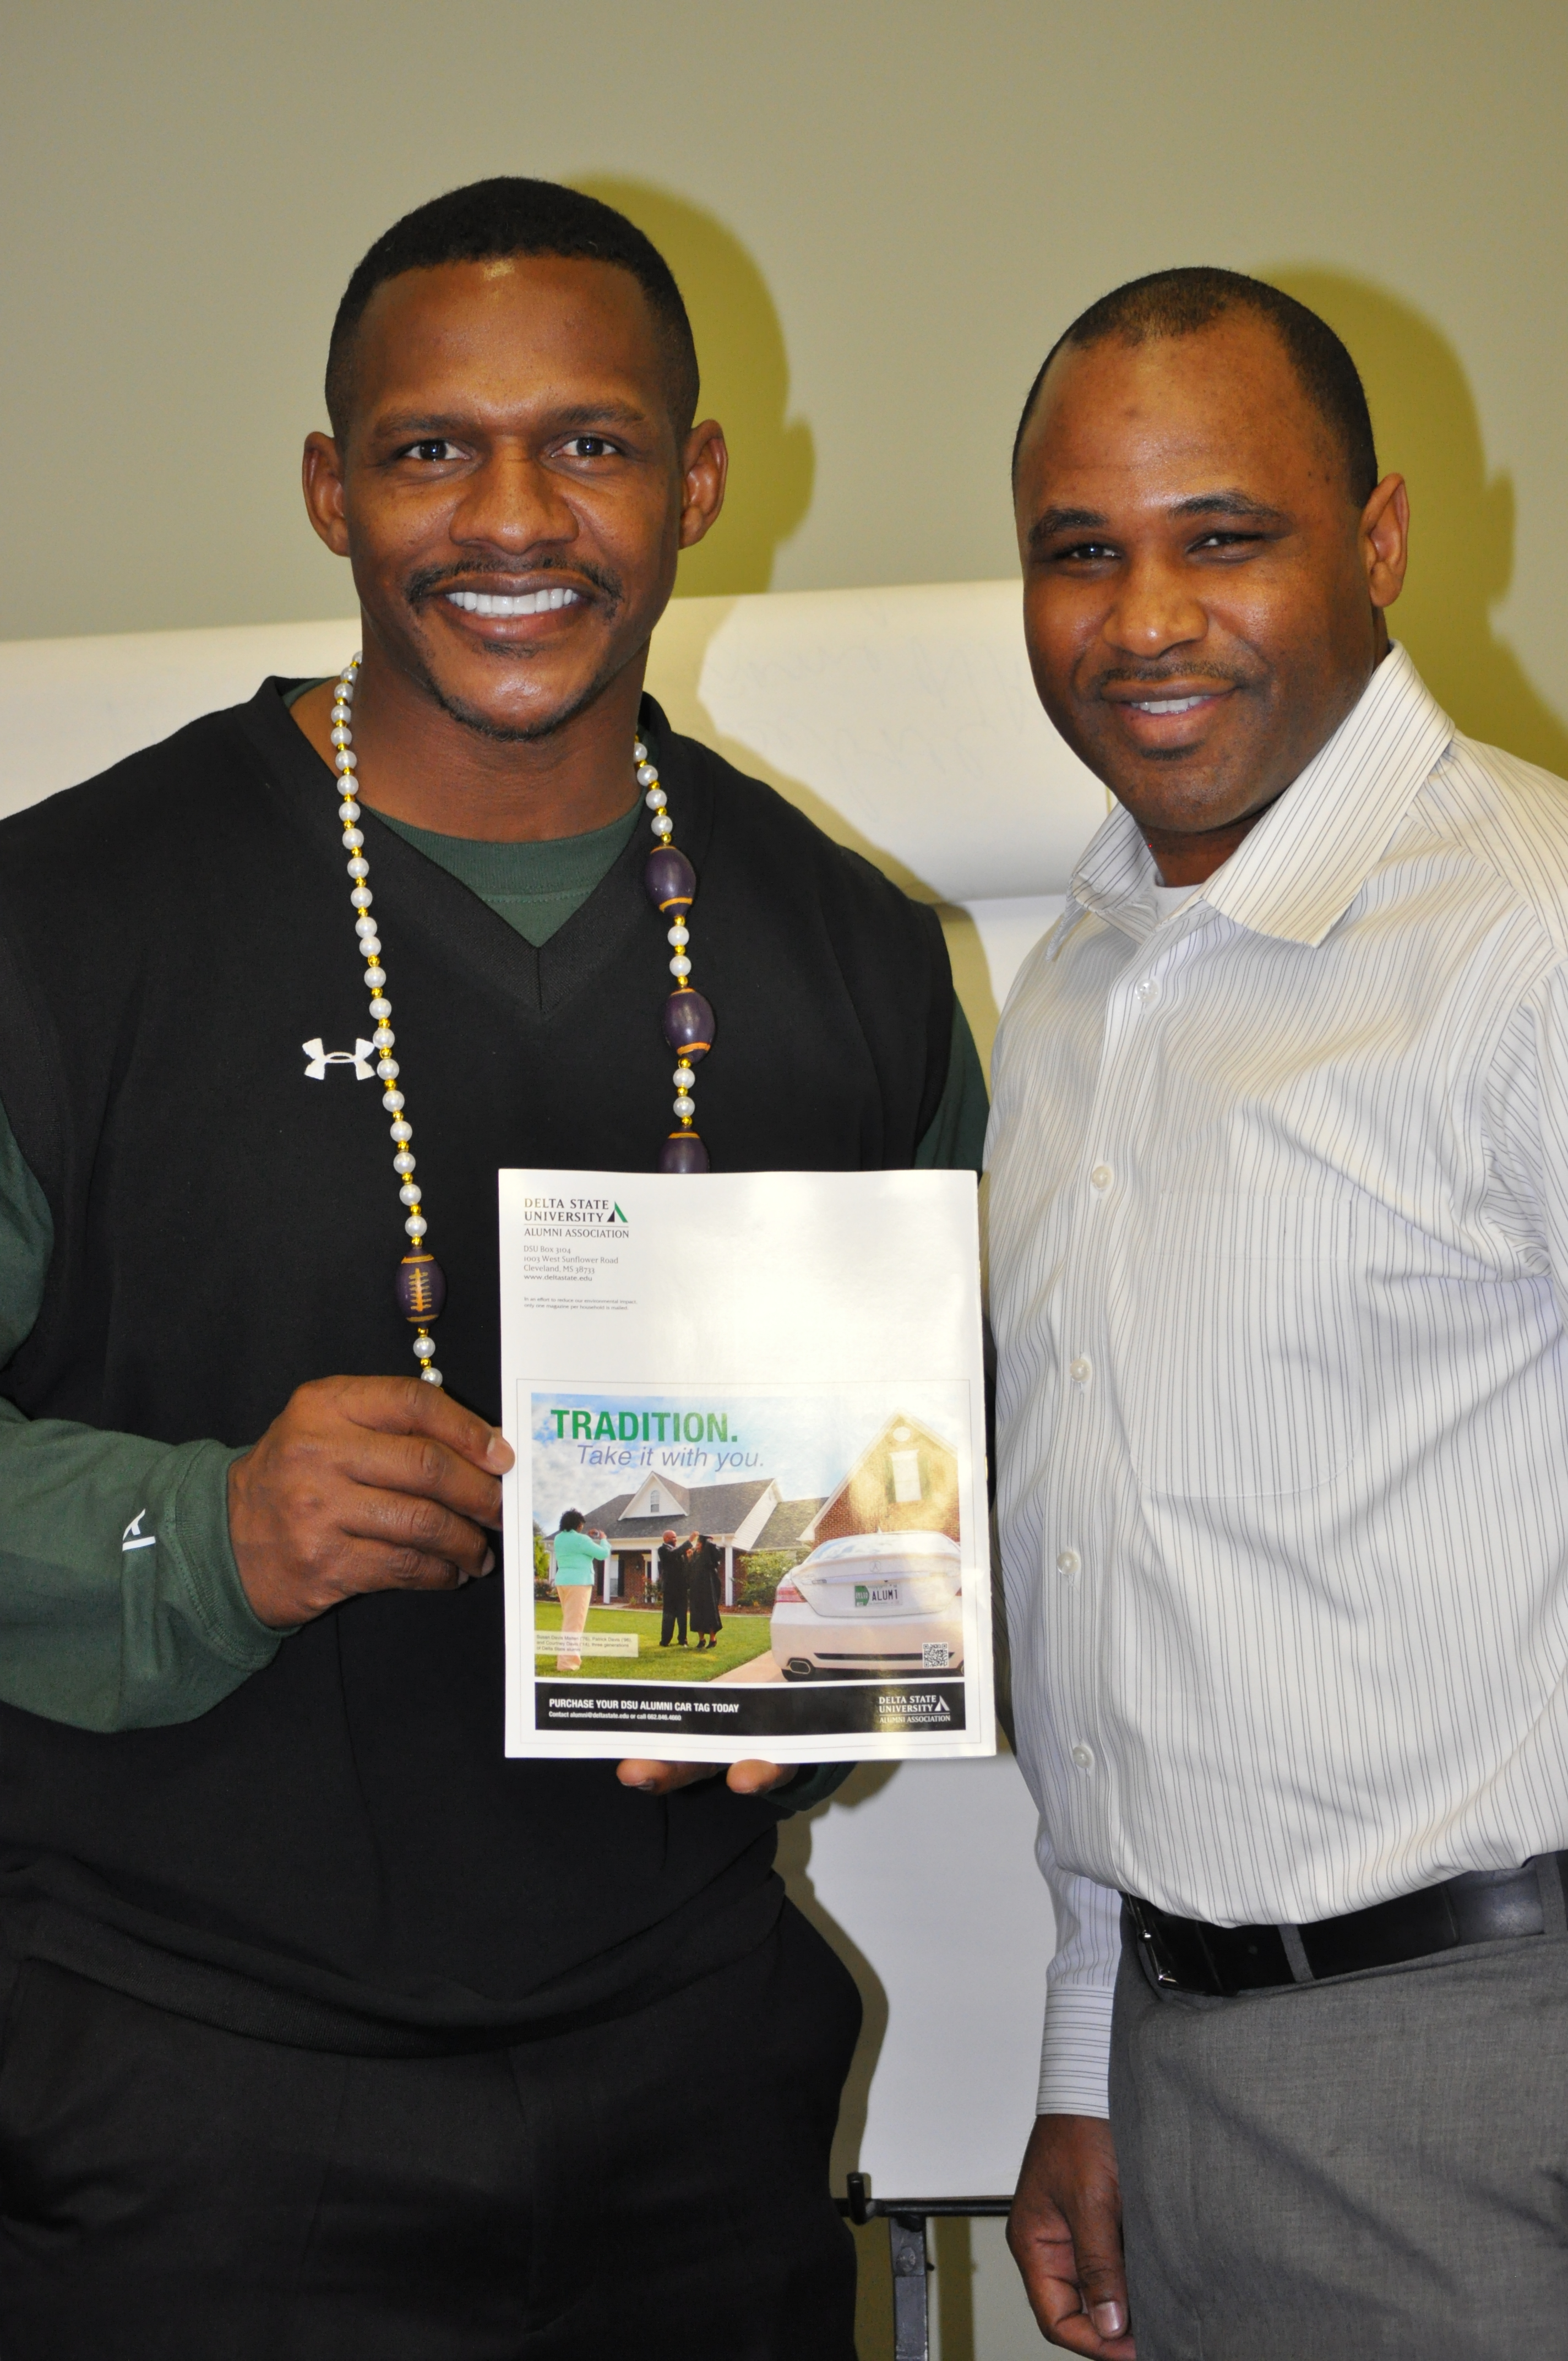 PHOTO:  Former New Orleans Saints wide receiver Joe Horn (friend) and Patrick Davis (’96) show off the latest Delta State University license plate advertisement on the back cover of the Delta State Alumni Magazine, which features Davis and his family, three generations of Delta State alumni with DSU car tags.